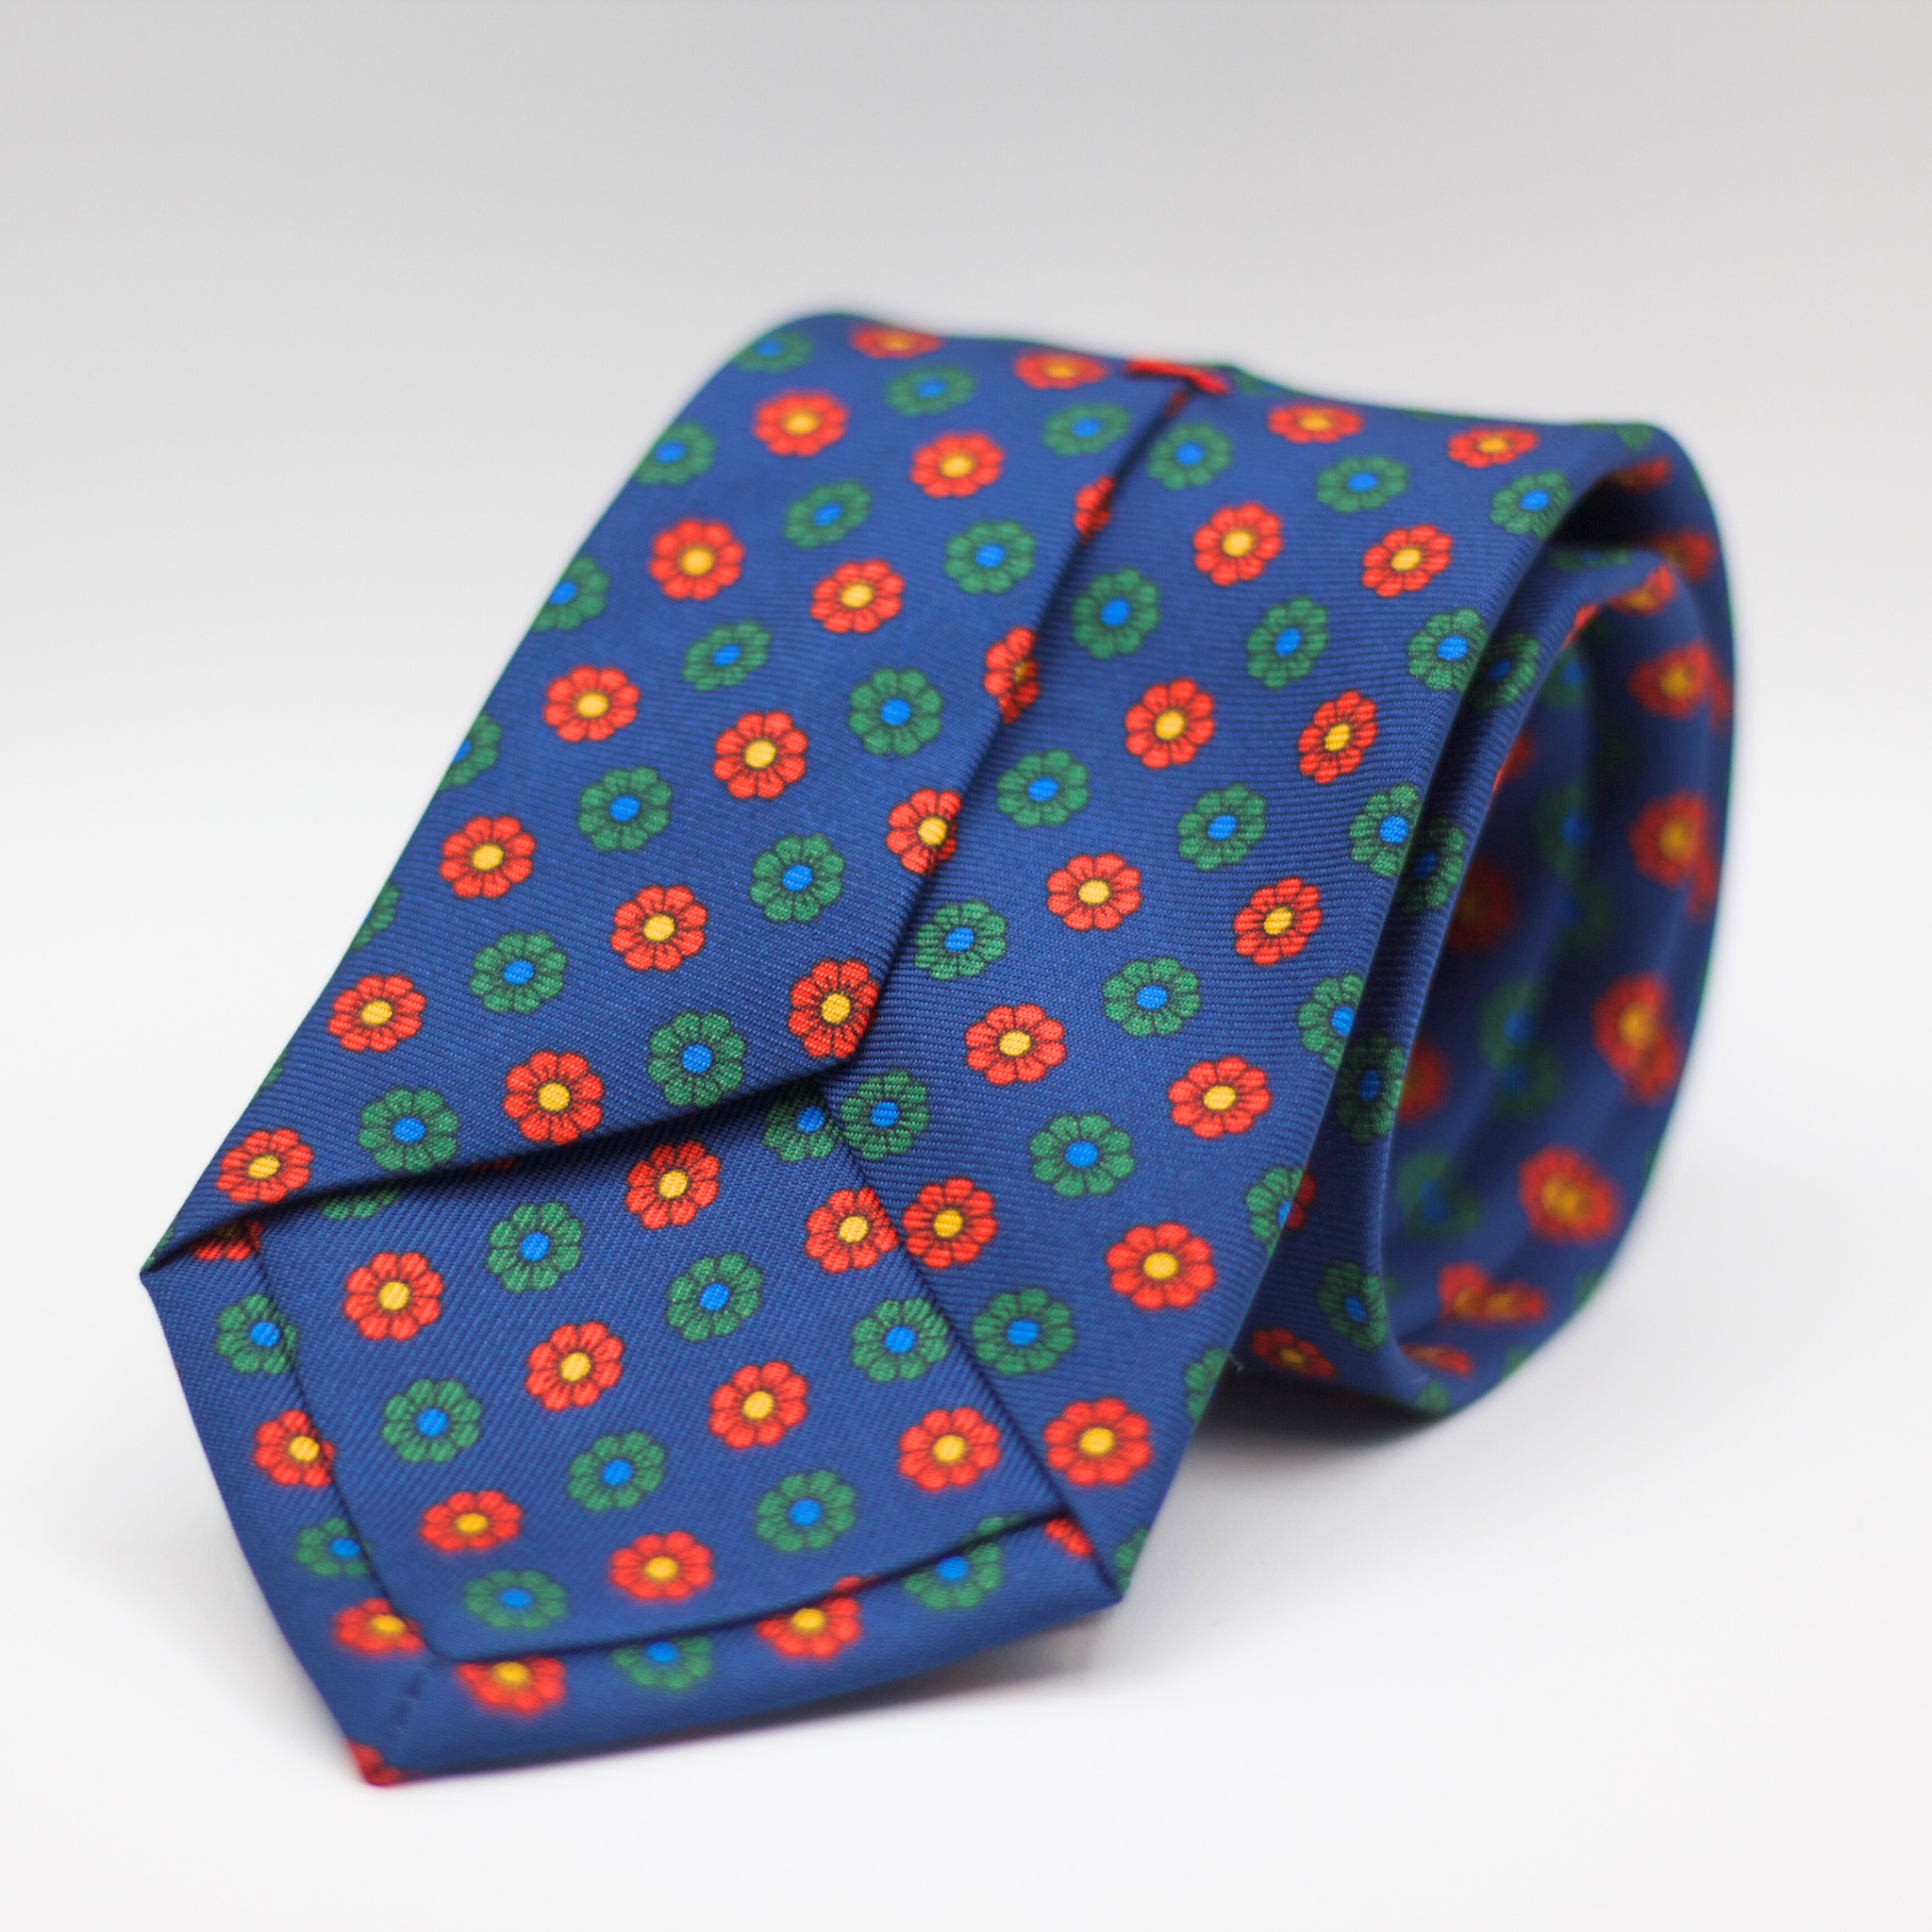 Cruciani & Bella 100% Silk Printed Self-Tipped Blue, Red, Yellow, Green and Light Blue Floral Motif Tie Handmade in Rome, Italy. 8 cm x 150 cm